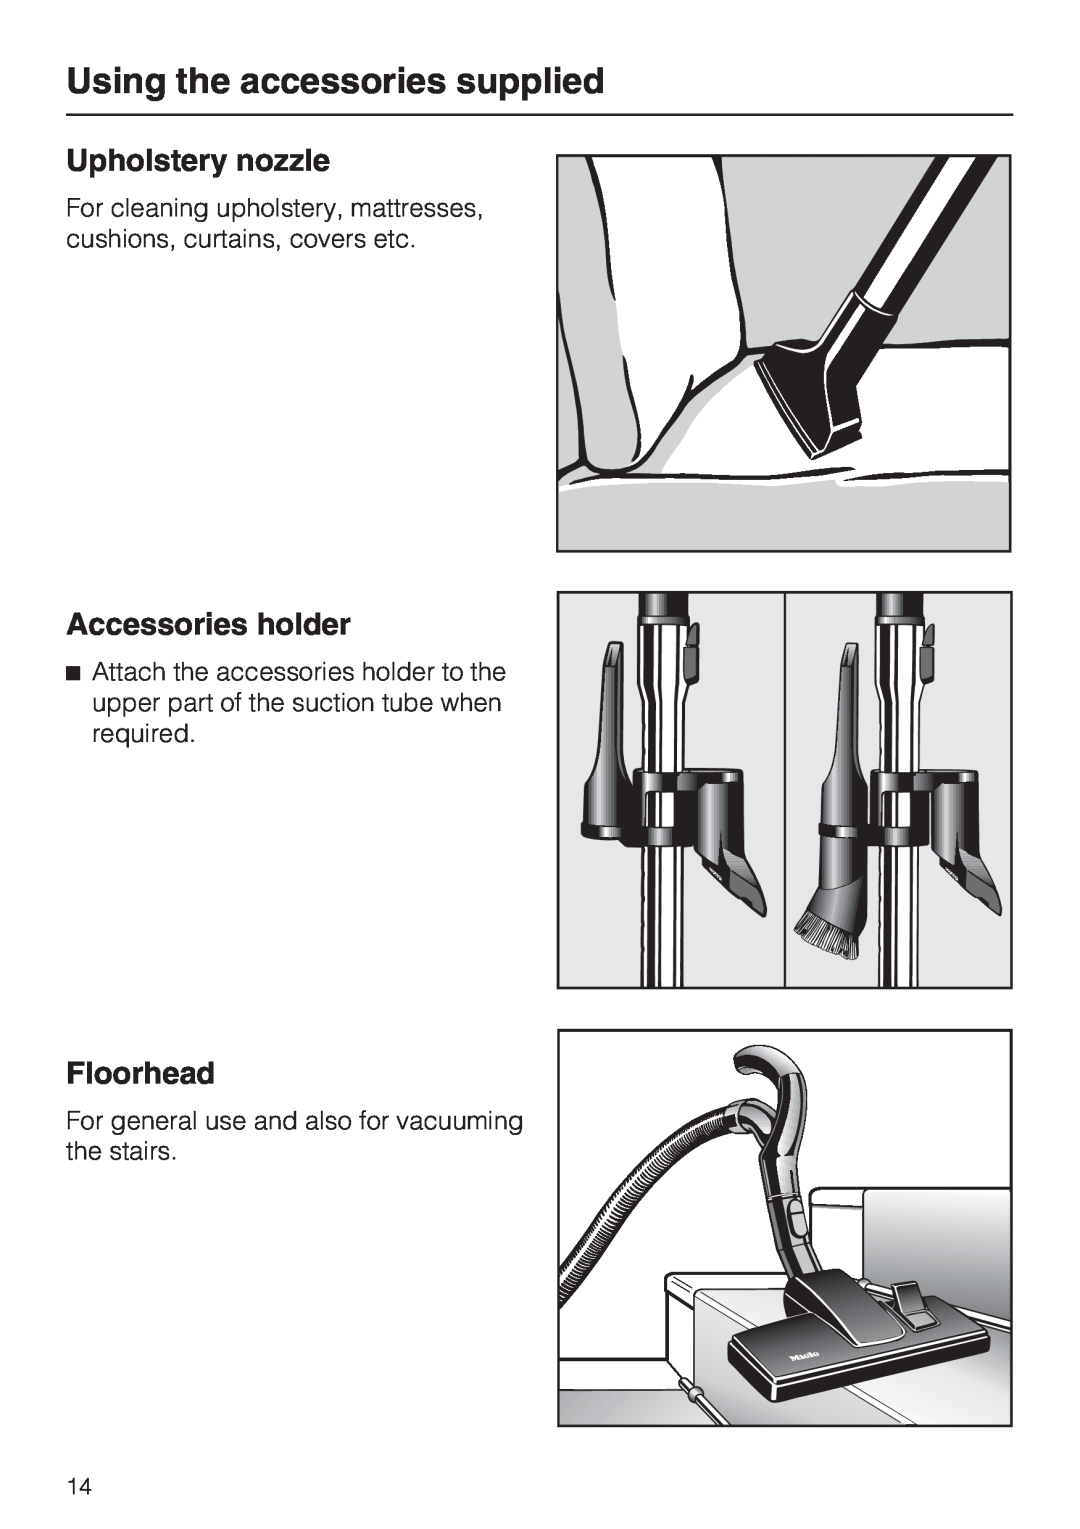 Miele S 4000 Series manual Upholstery nozzle, Accessories holder, Floorhead, Using the accessories supplied 